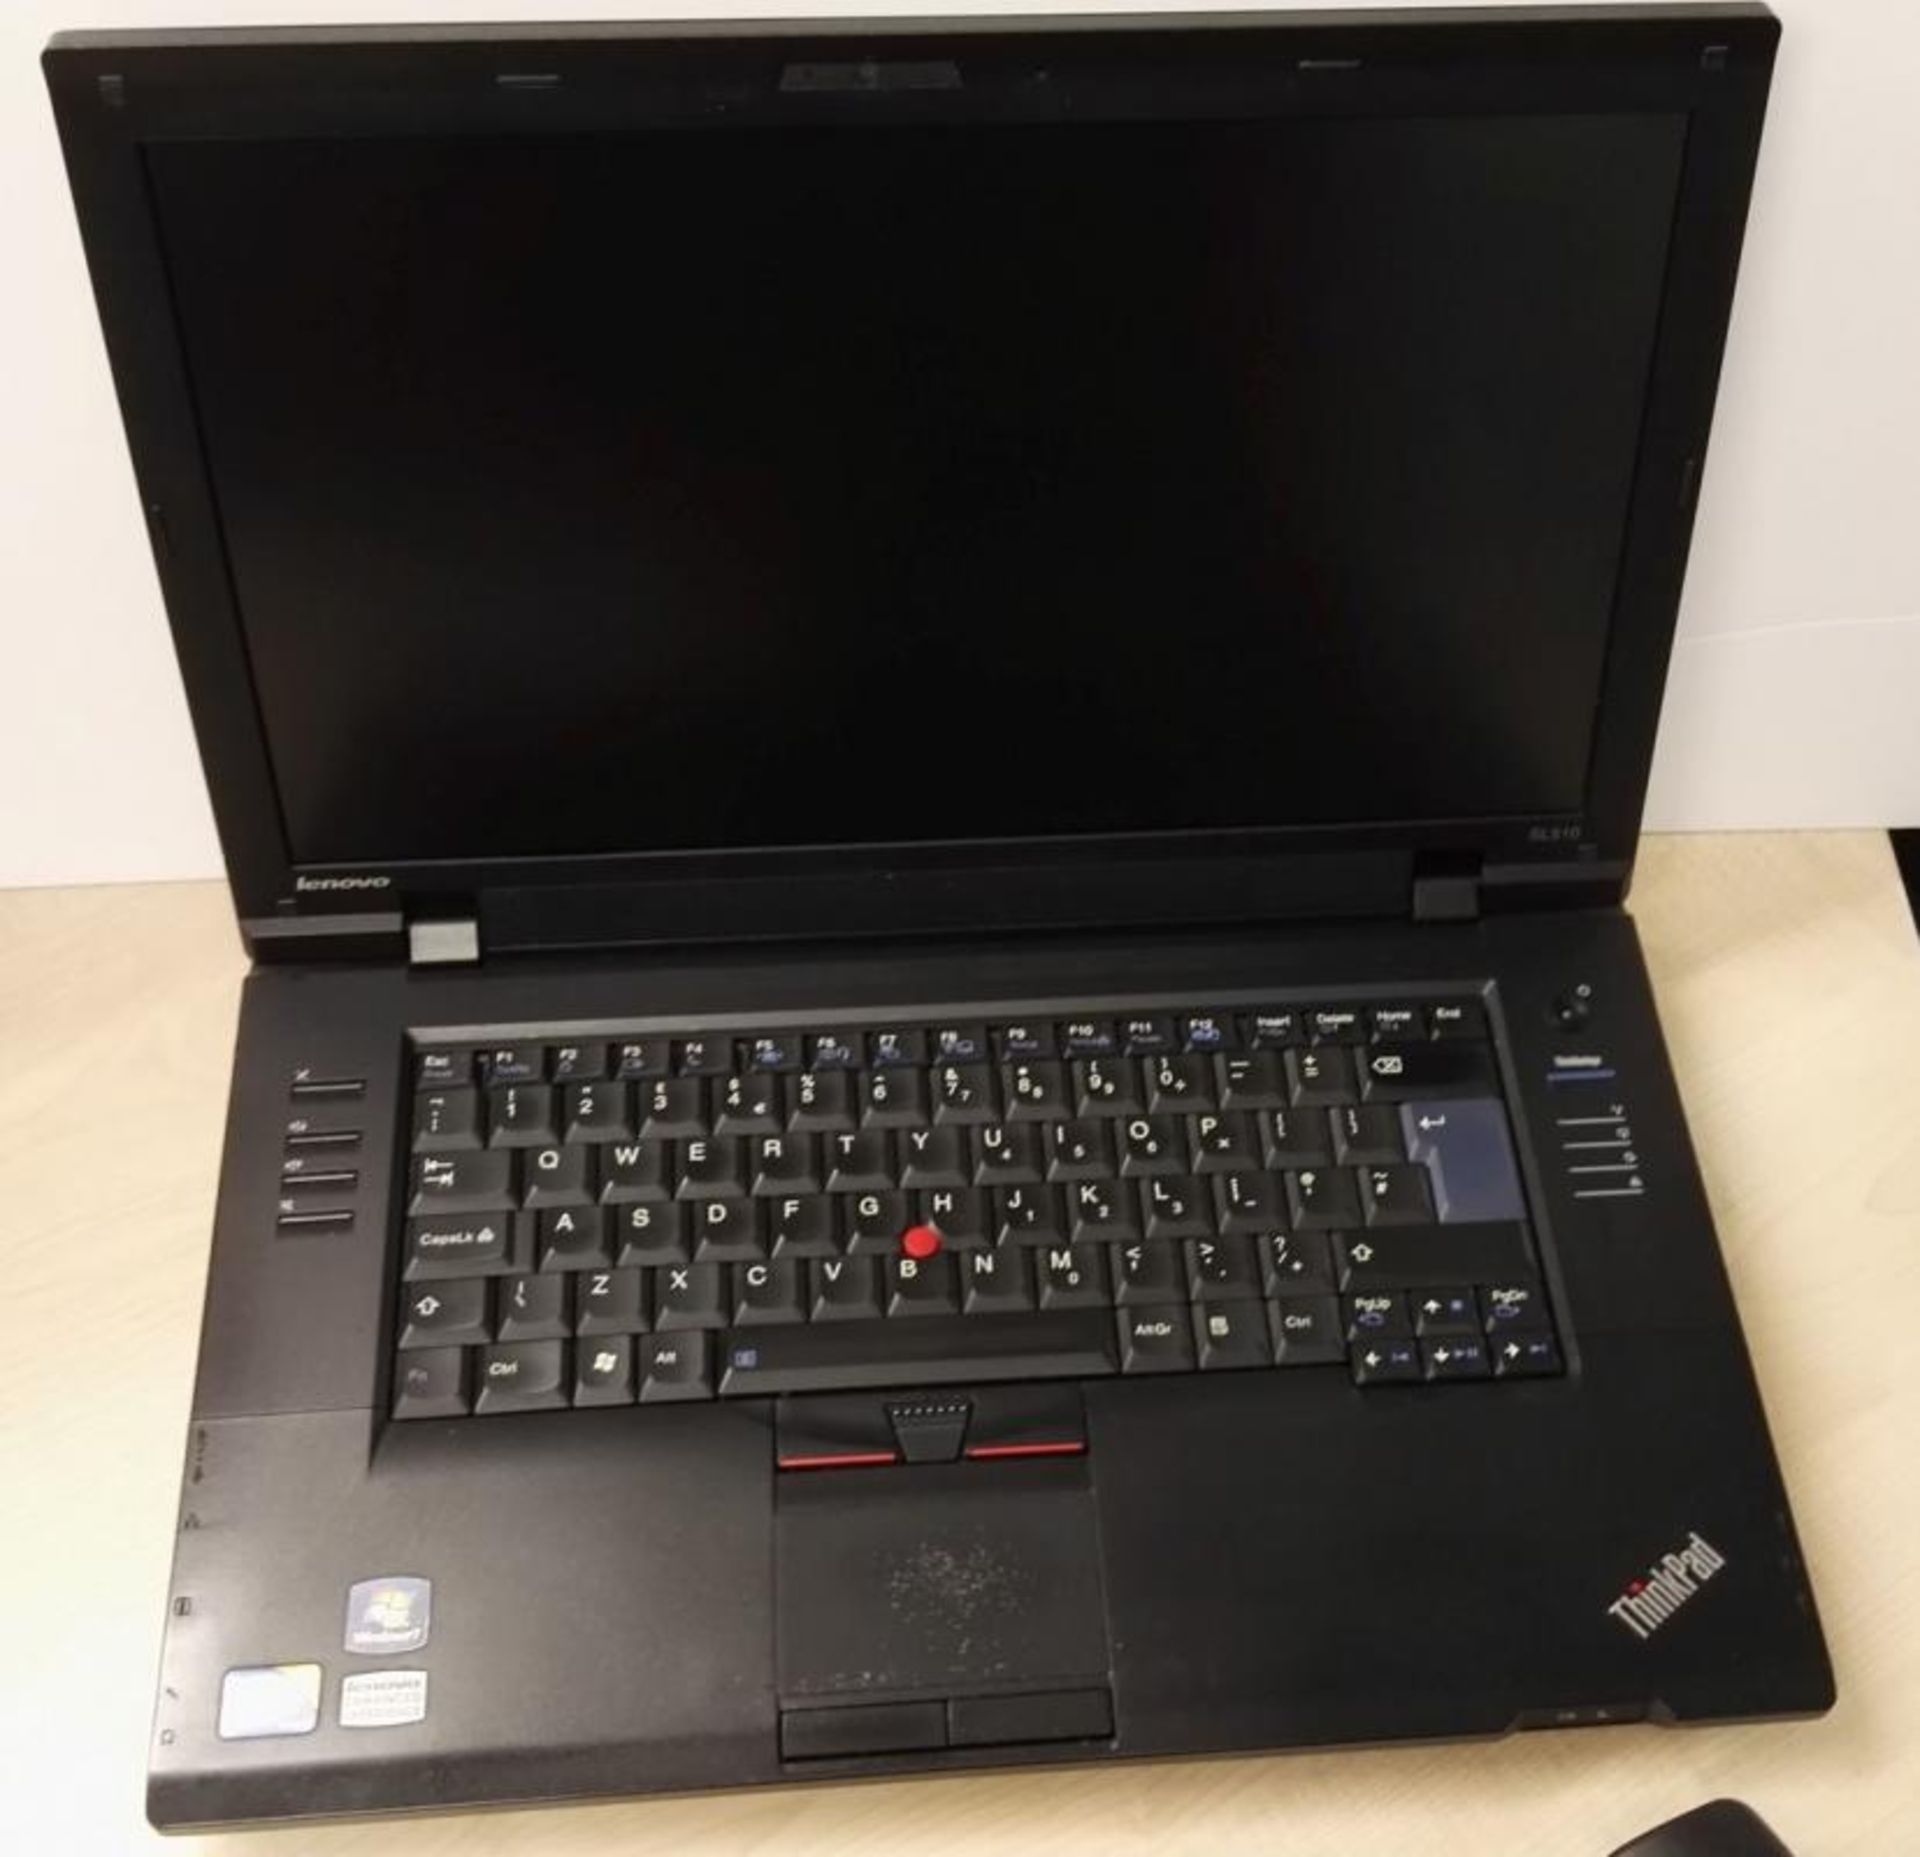 1 x Lenovo Thinkpad SL510 Laptop Computer - Features a 15.6 Inch Screen, Intel Core 2 Duo T6670 2.2g - Image 3 of 10